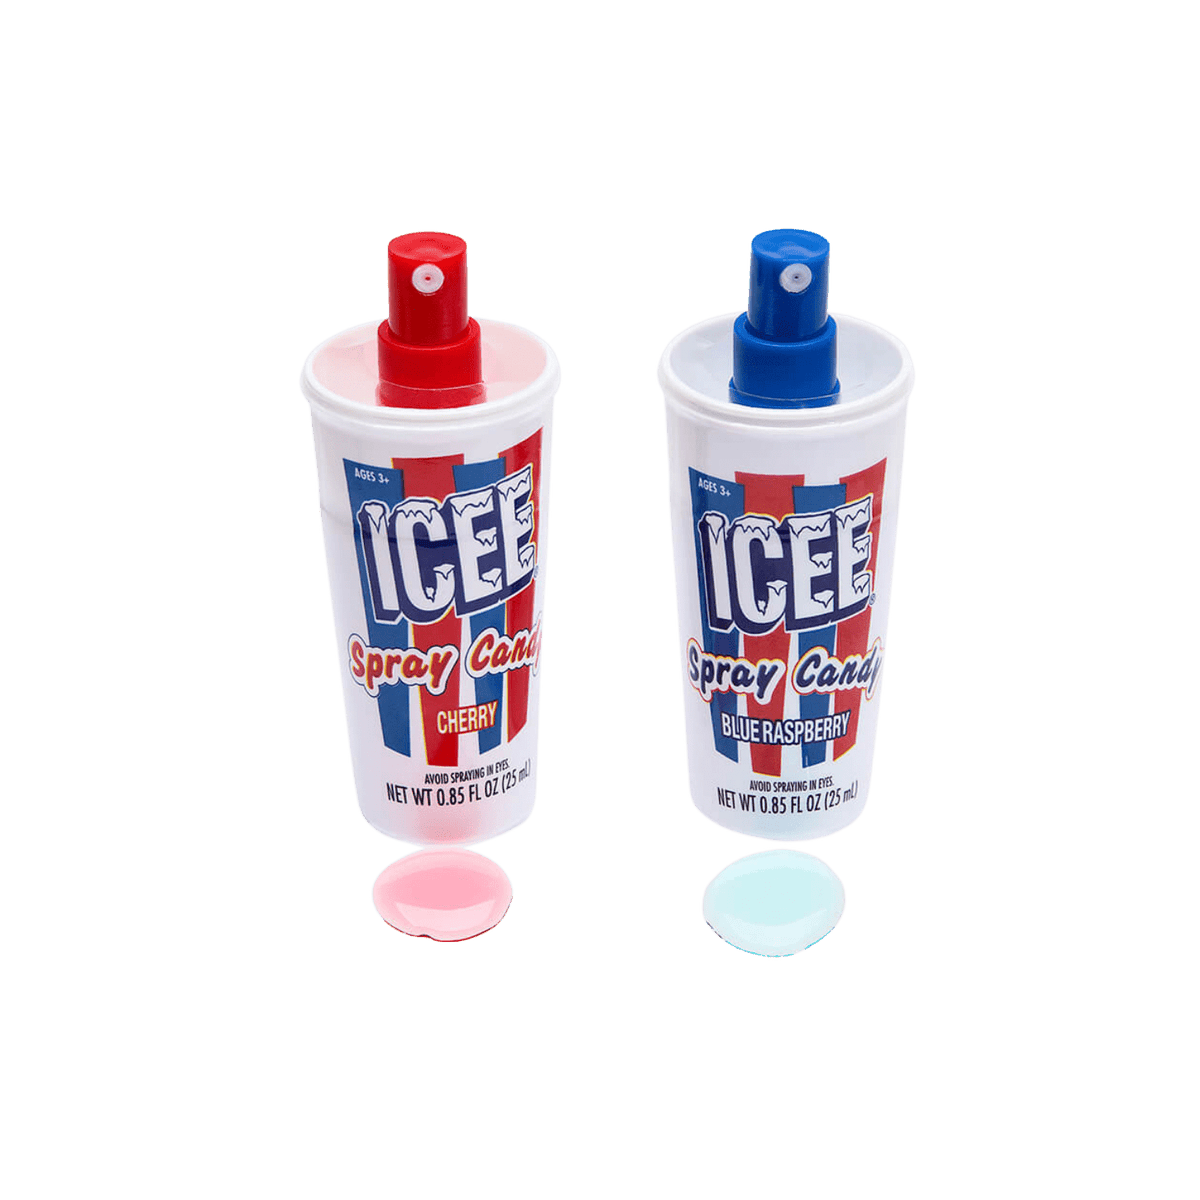 Lolli and Pops Novelty Icee Spray Candy